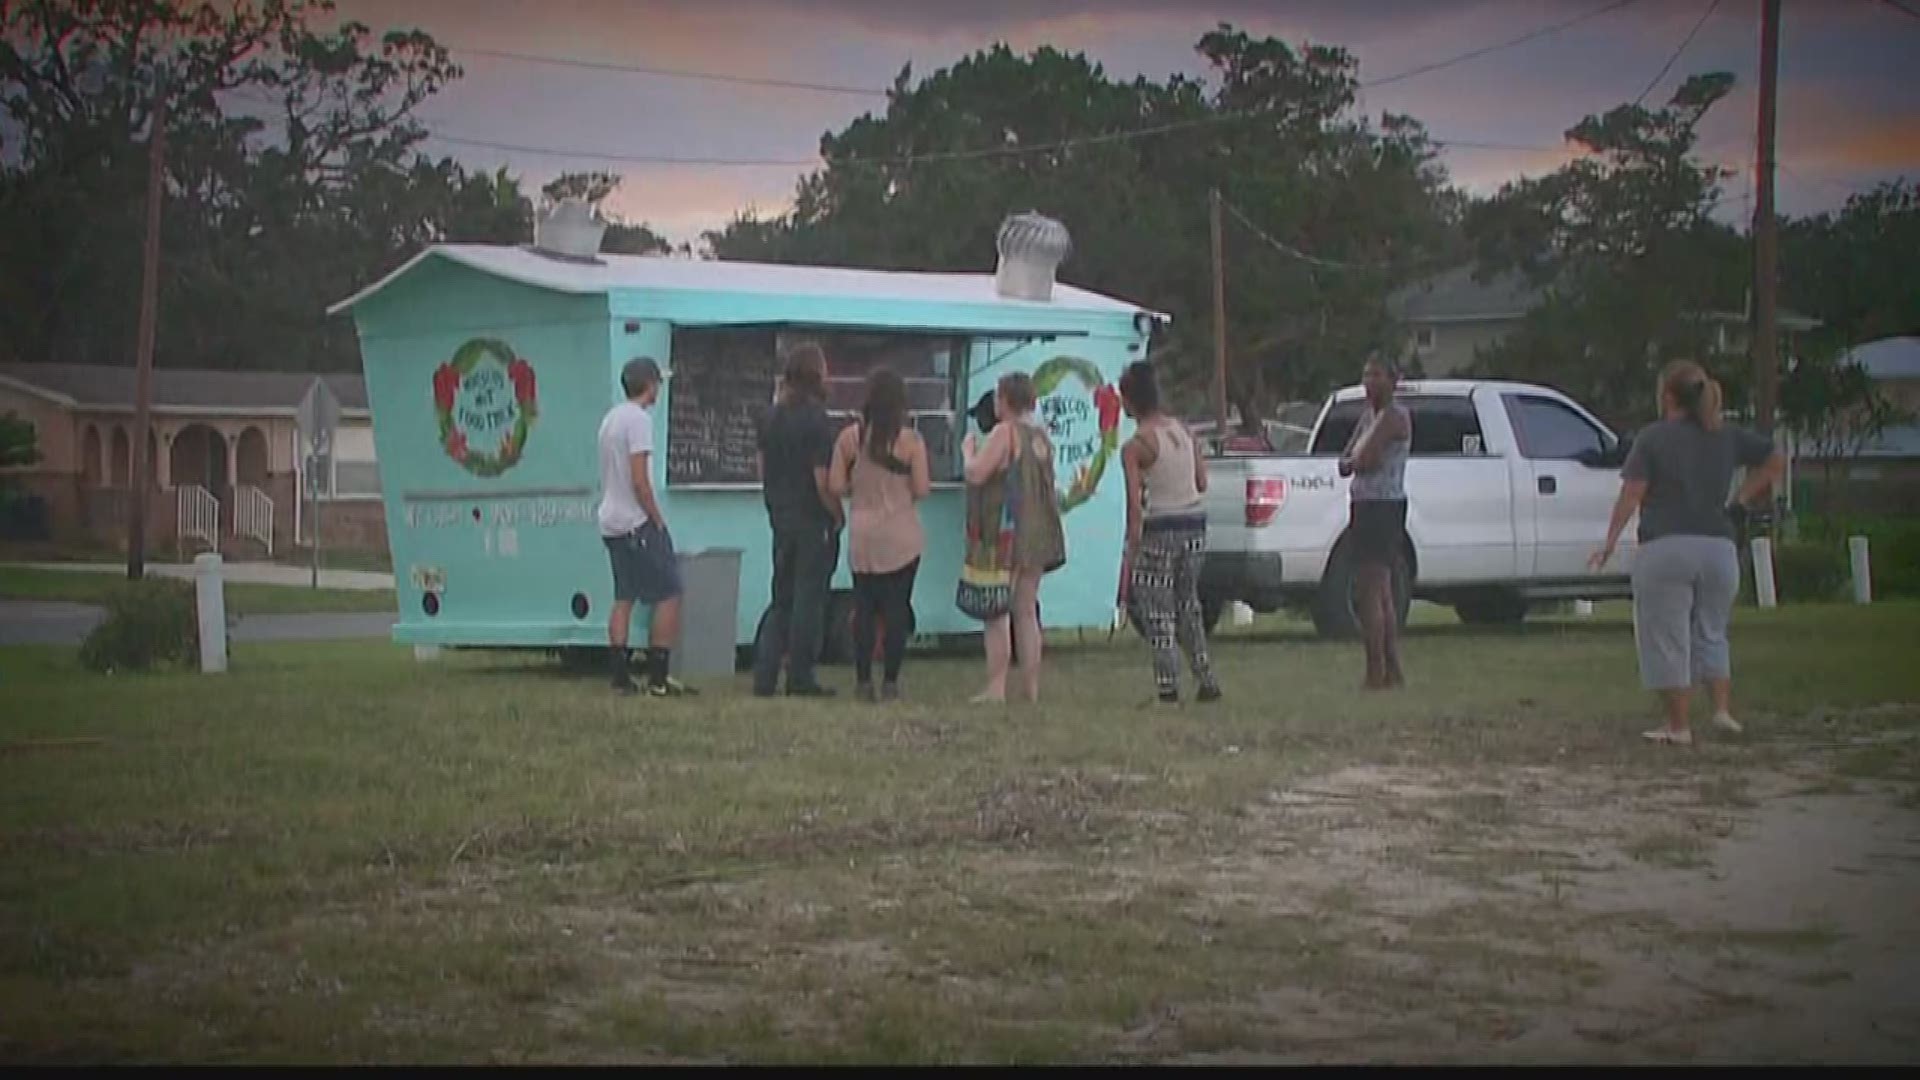 Hibiscus Hut Food Truck said they fed about 100 people for free after Hurricane Irma.